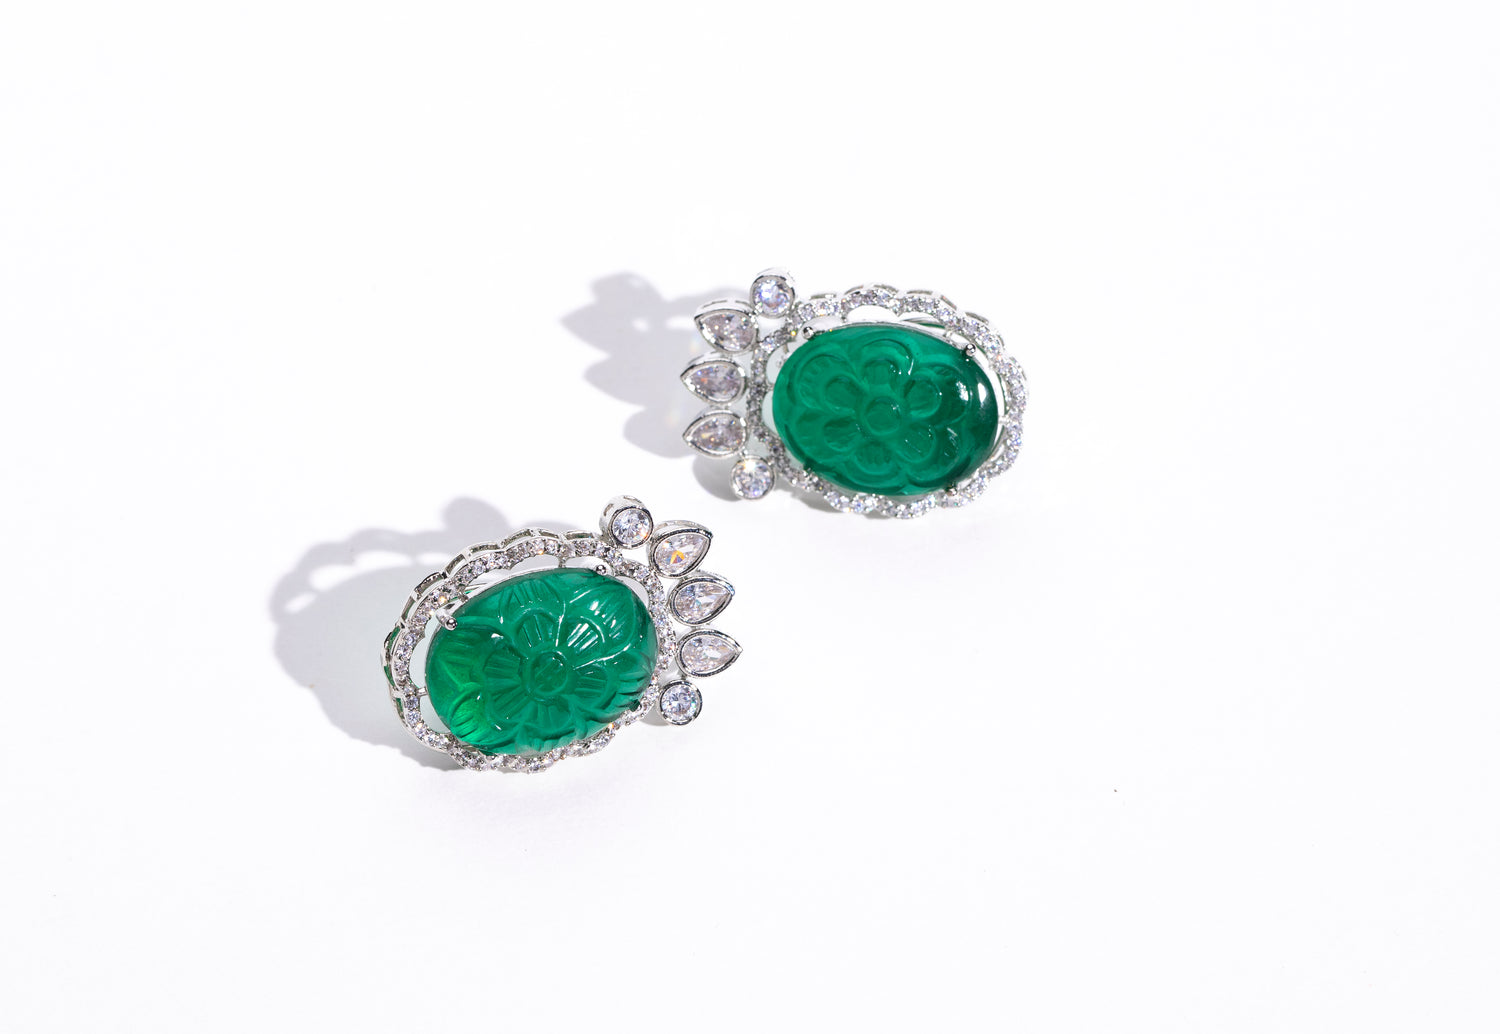 emerald diamond earrings, Statement Piece: Classic Emerald Swarovski Earrings for Women: Add glamour to any look with these stunning earrings." "Sophisticated Green Emerald Swarovski Earrings: Make a statement with these elegant earrings for women."